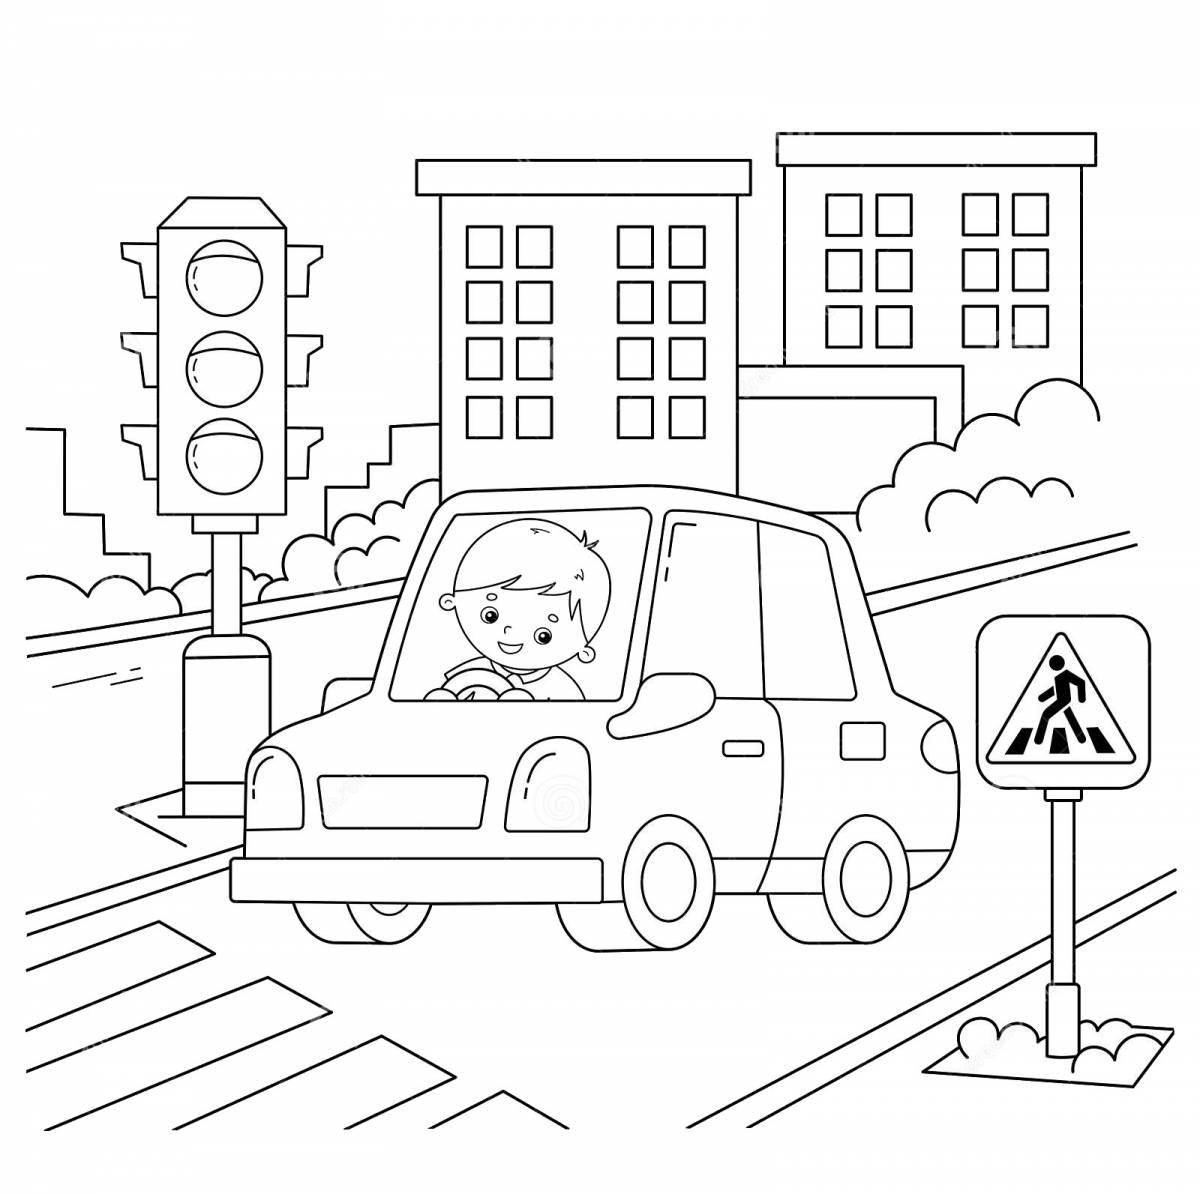 Coloring page inviting road home